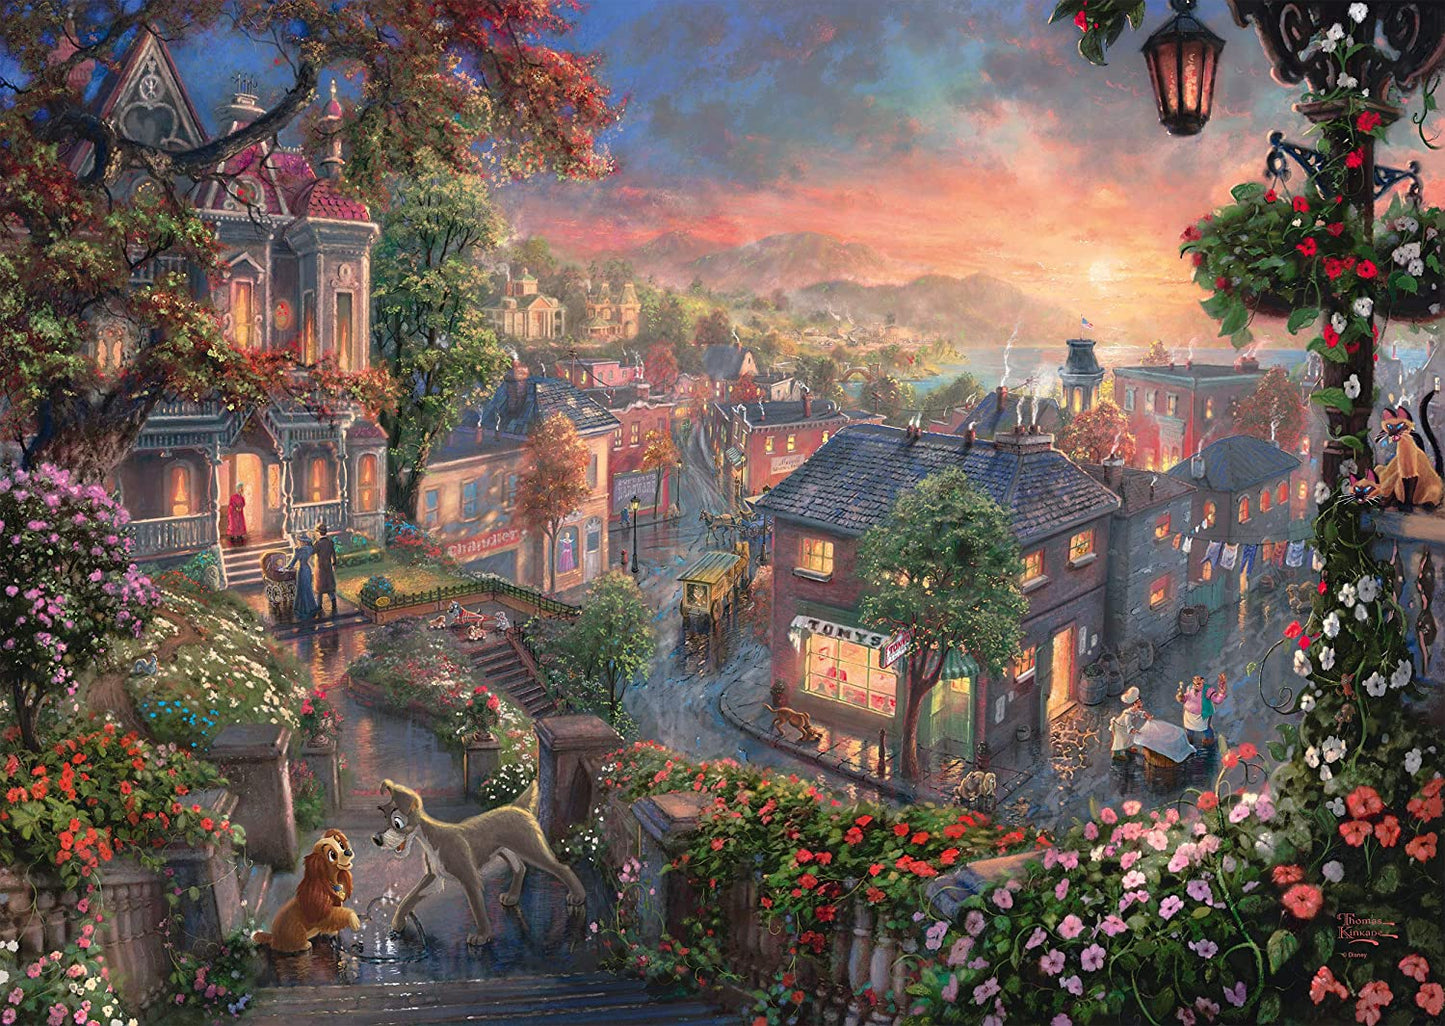 Lady and the Tramp by Thomas Kinkade, 1000 Piece Puzzle